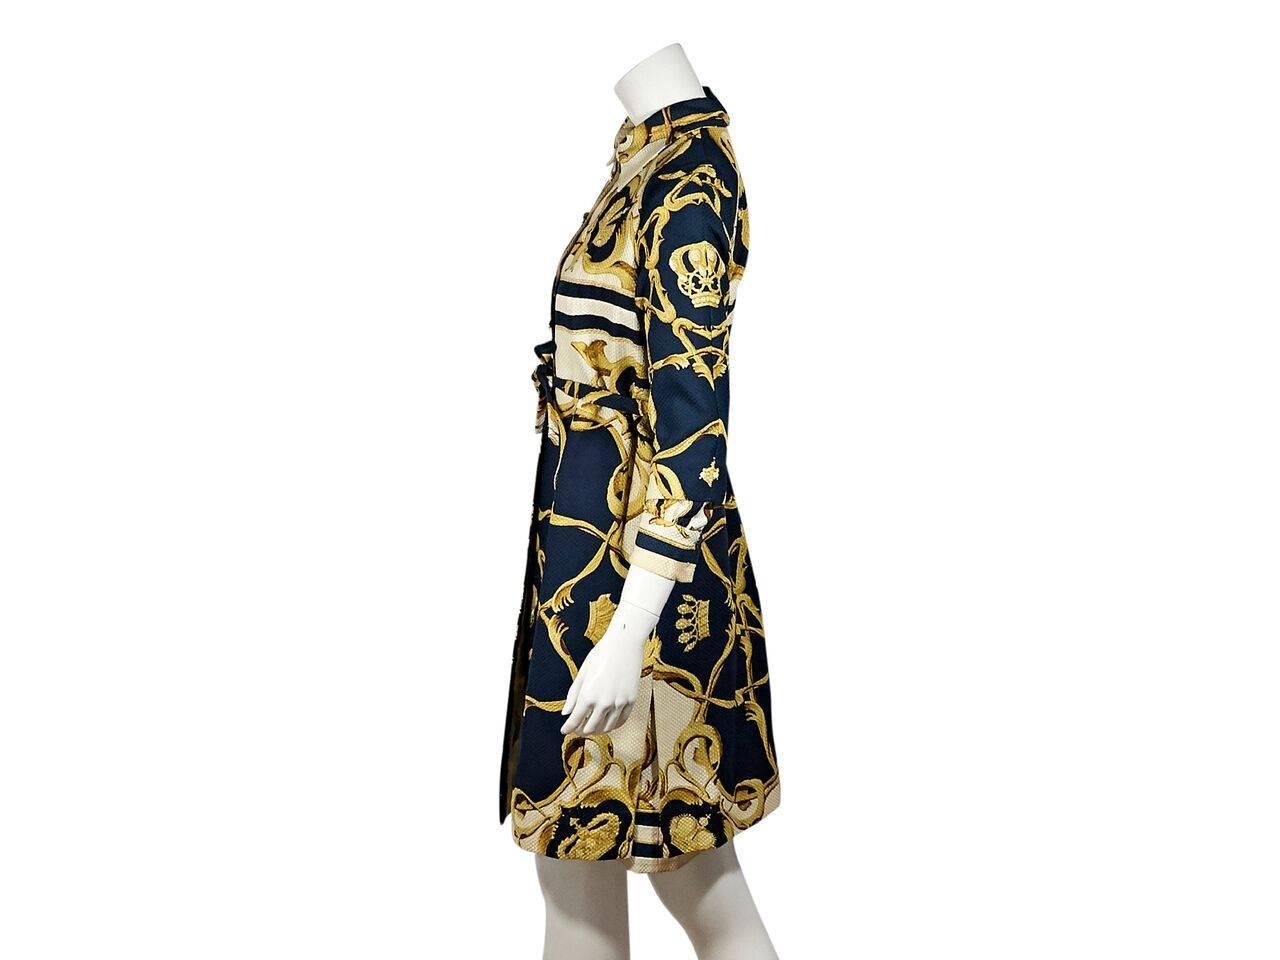 Product details:  Vintage multicolor printed coat and dress set by Hermes.  Spread collar.  Elbow-length sleeves.  Button-front closure.  Bow detail at waist.  Side hem slits.  Matching printed shirtdress.  
Condition: Pre-owned. Very good.
Est.